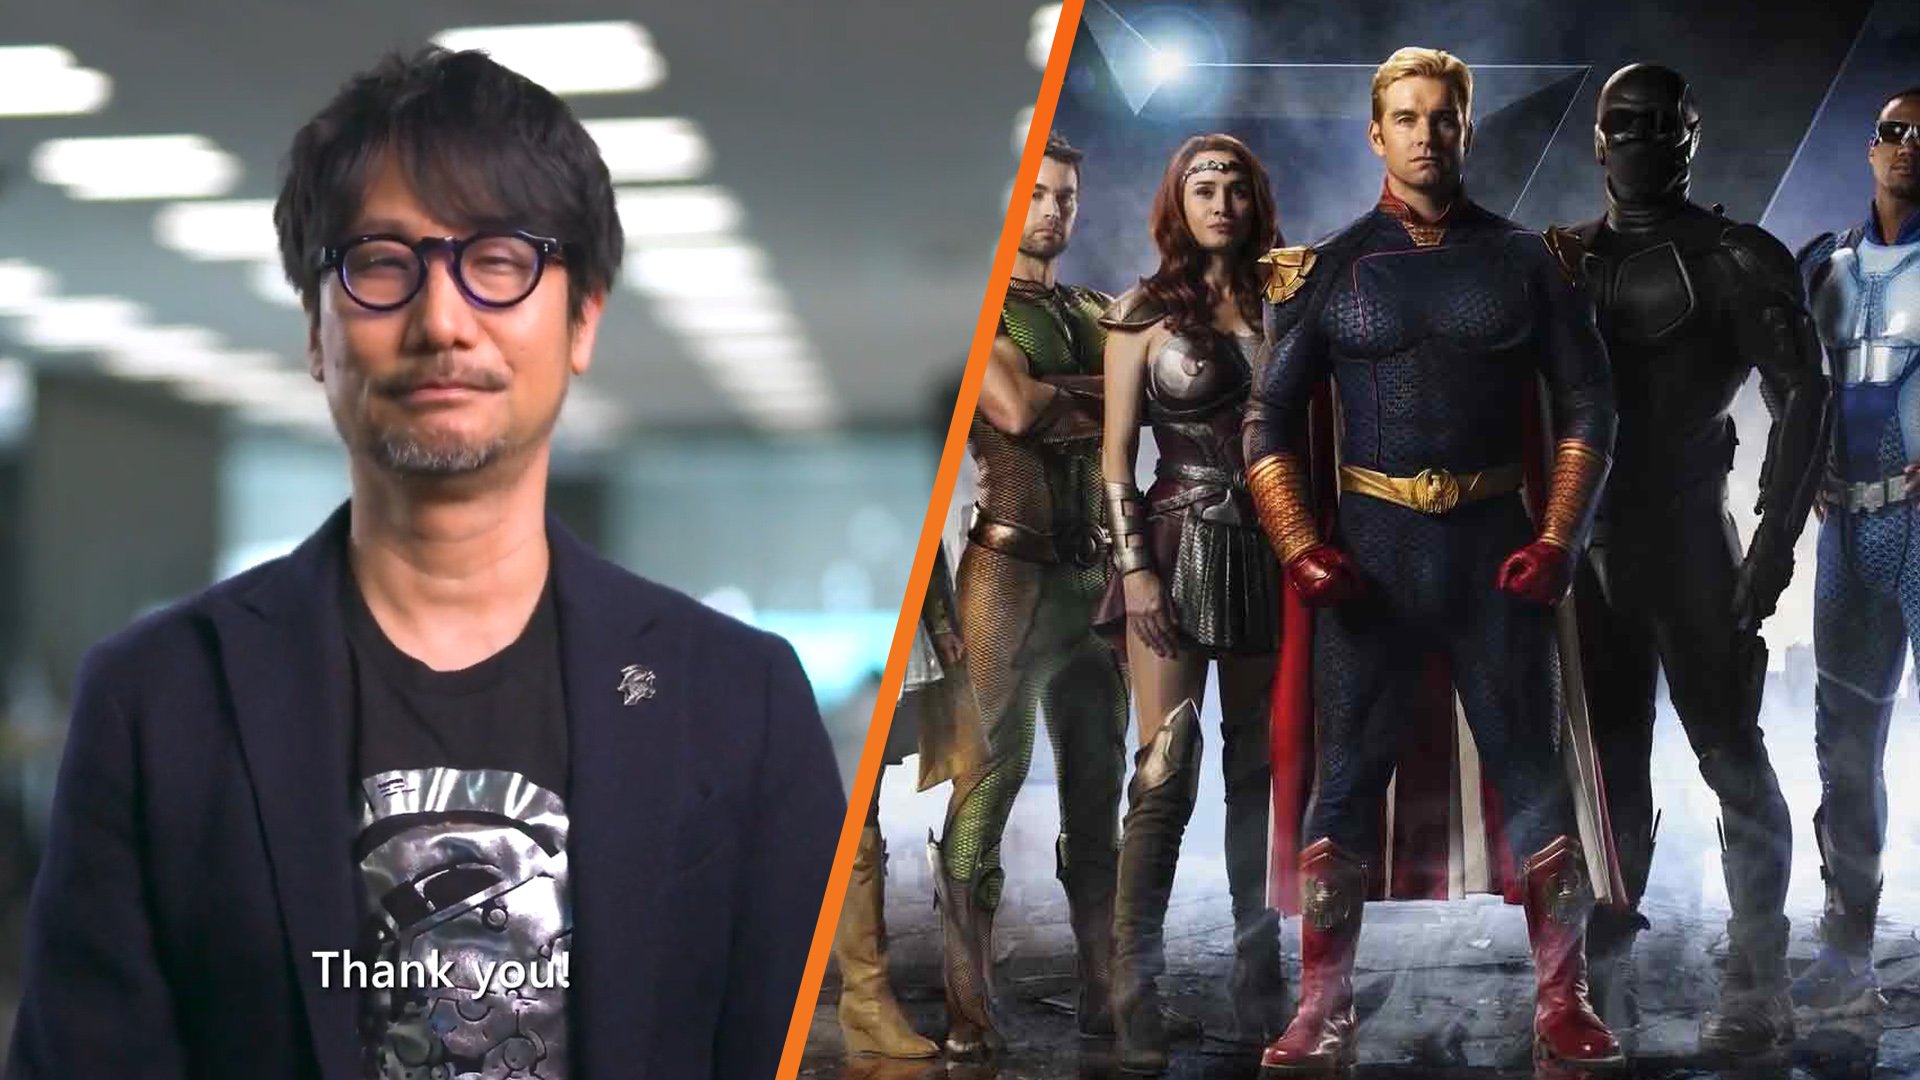 Hideo Kojima says he shelved a game concept due to 'similarity to